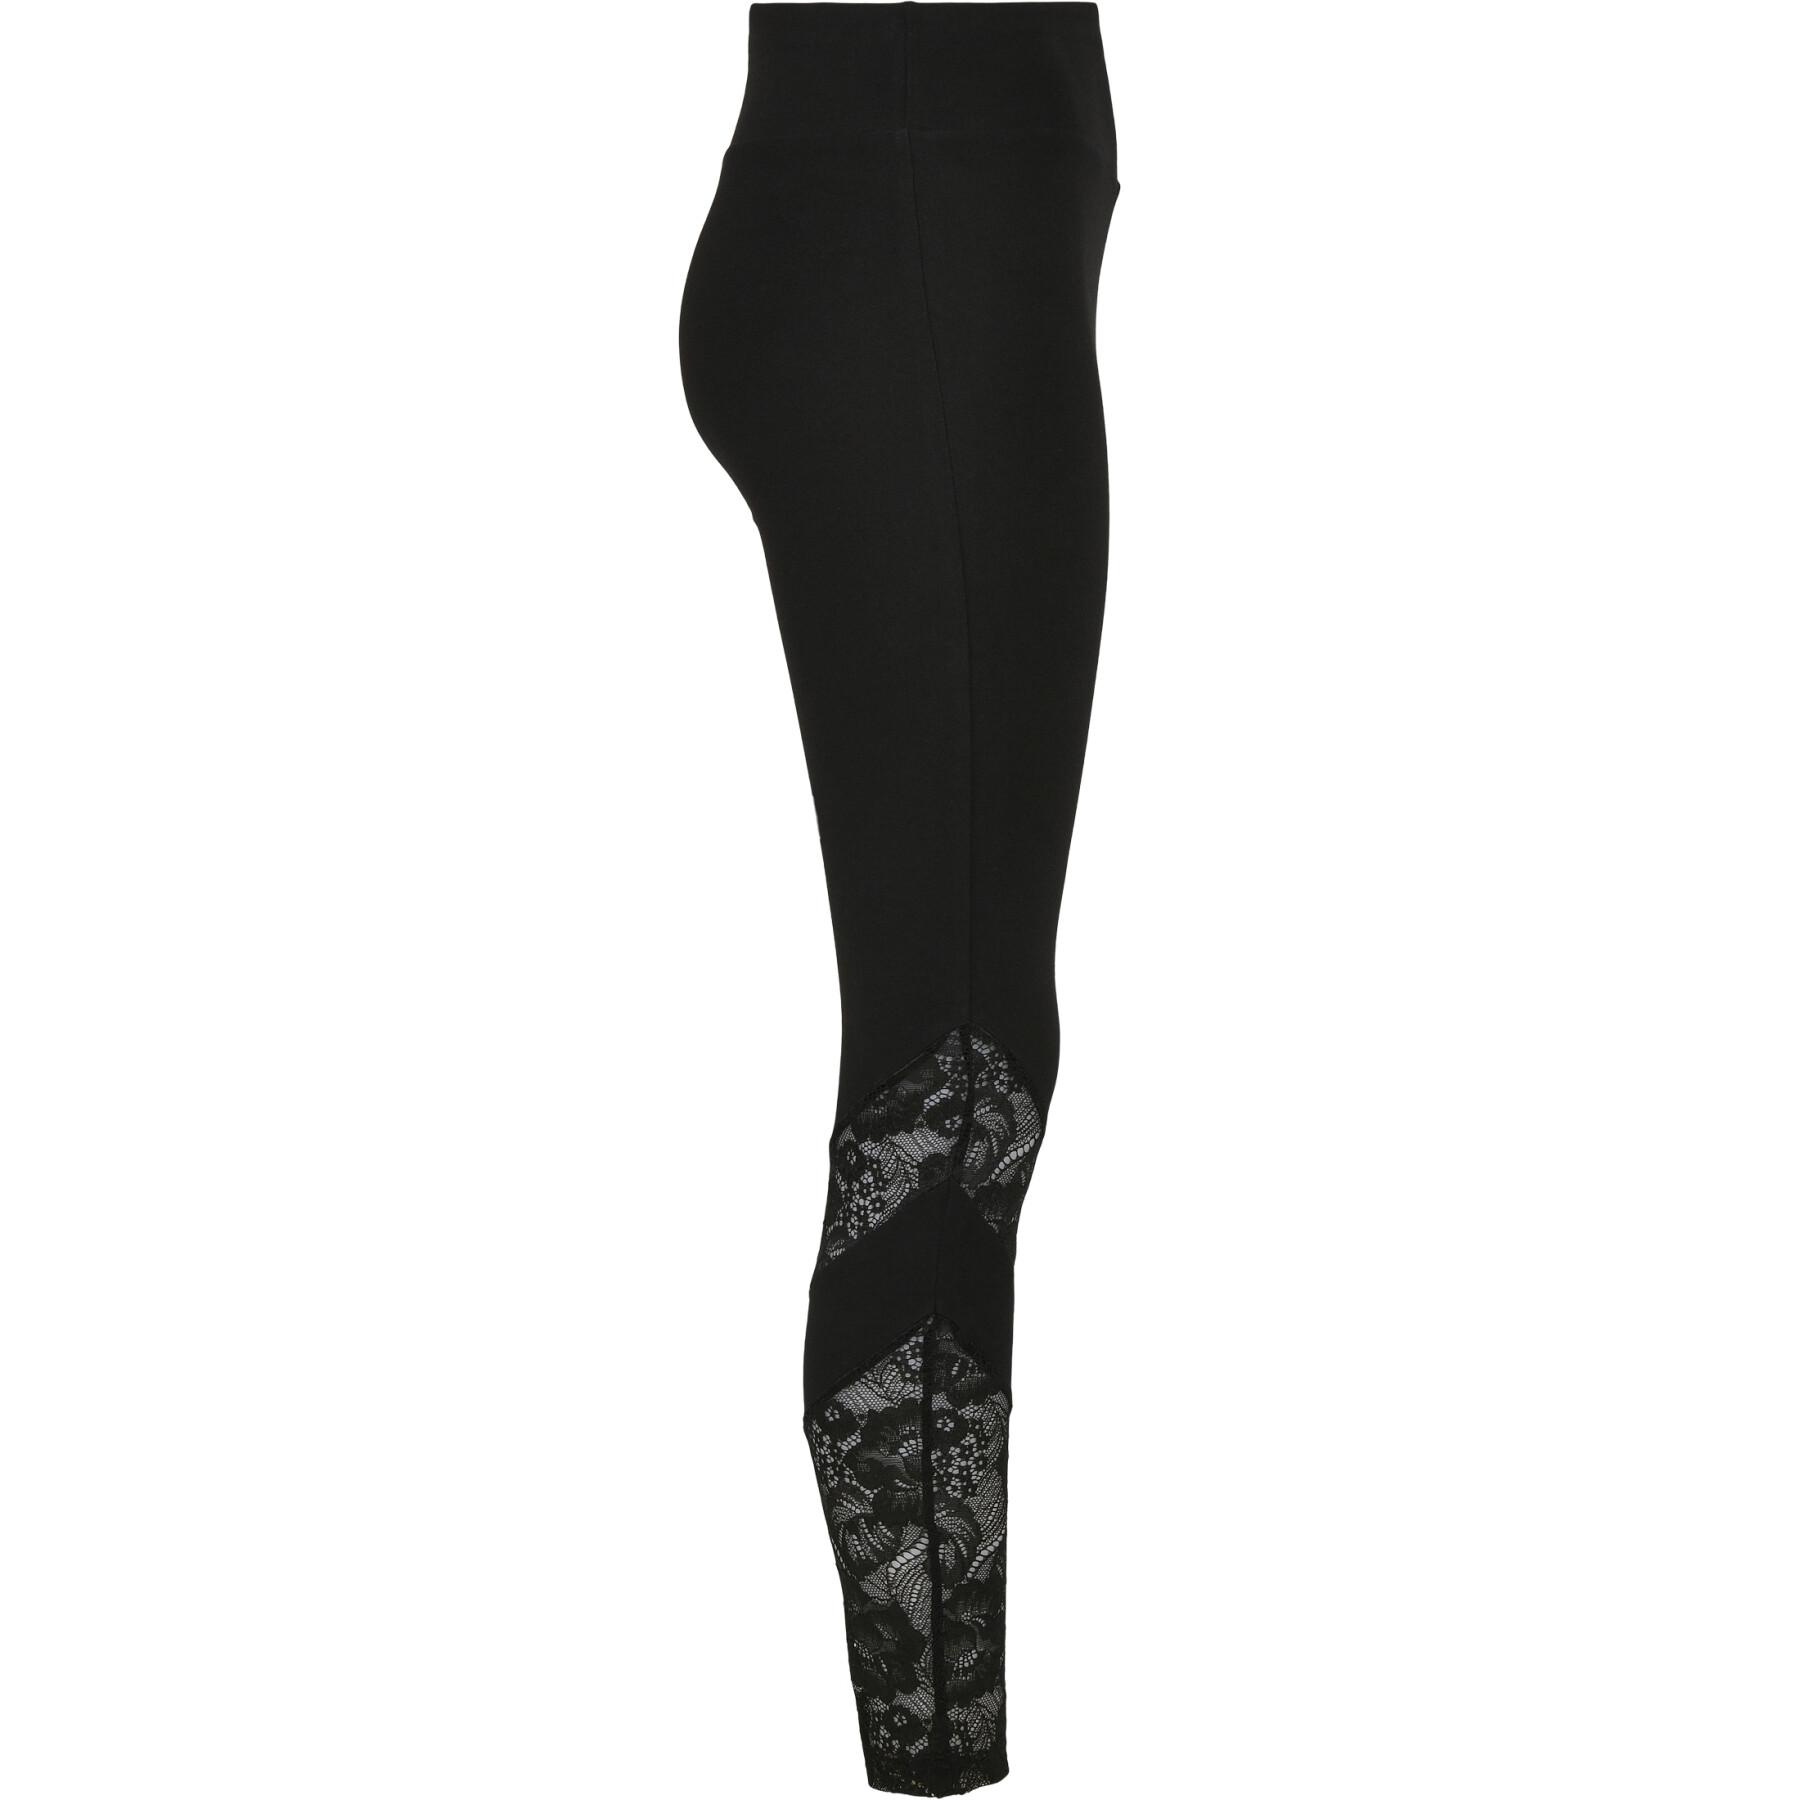 Women's high-waisted leggings Urban Classics lace inset (GT)